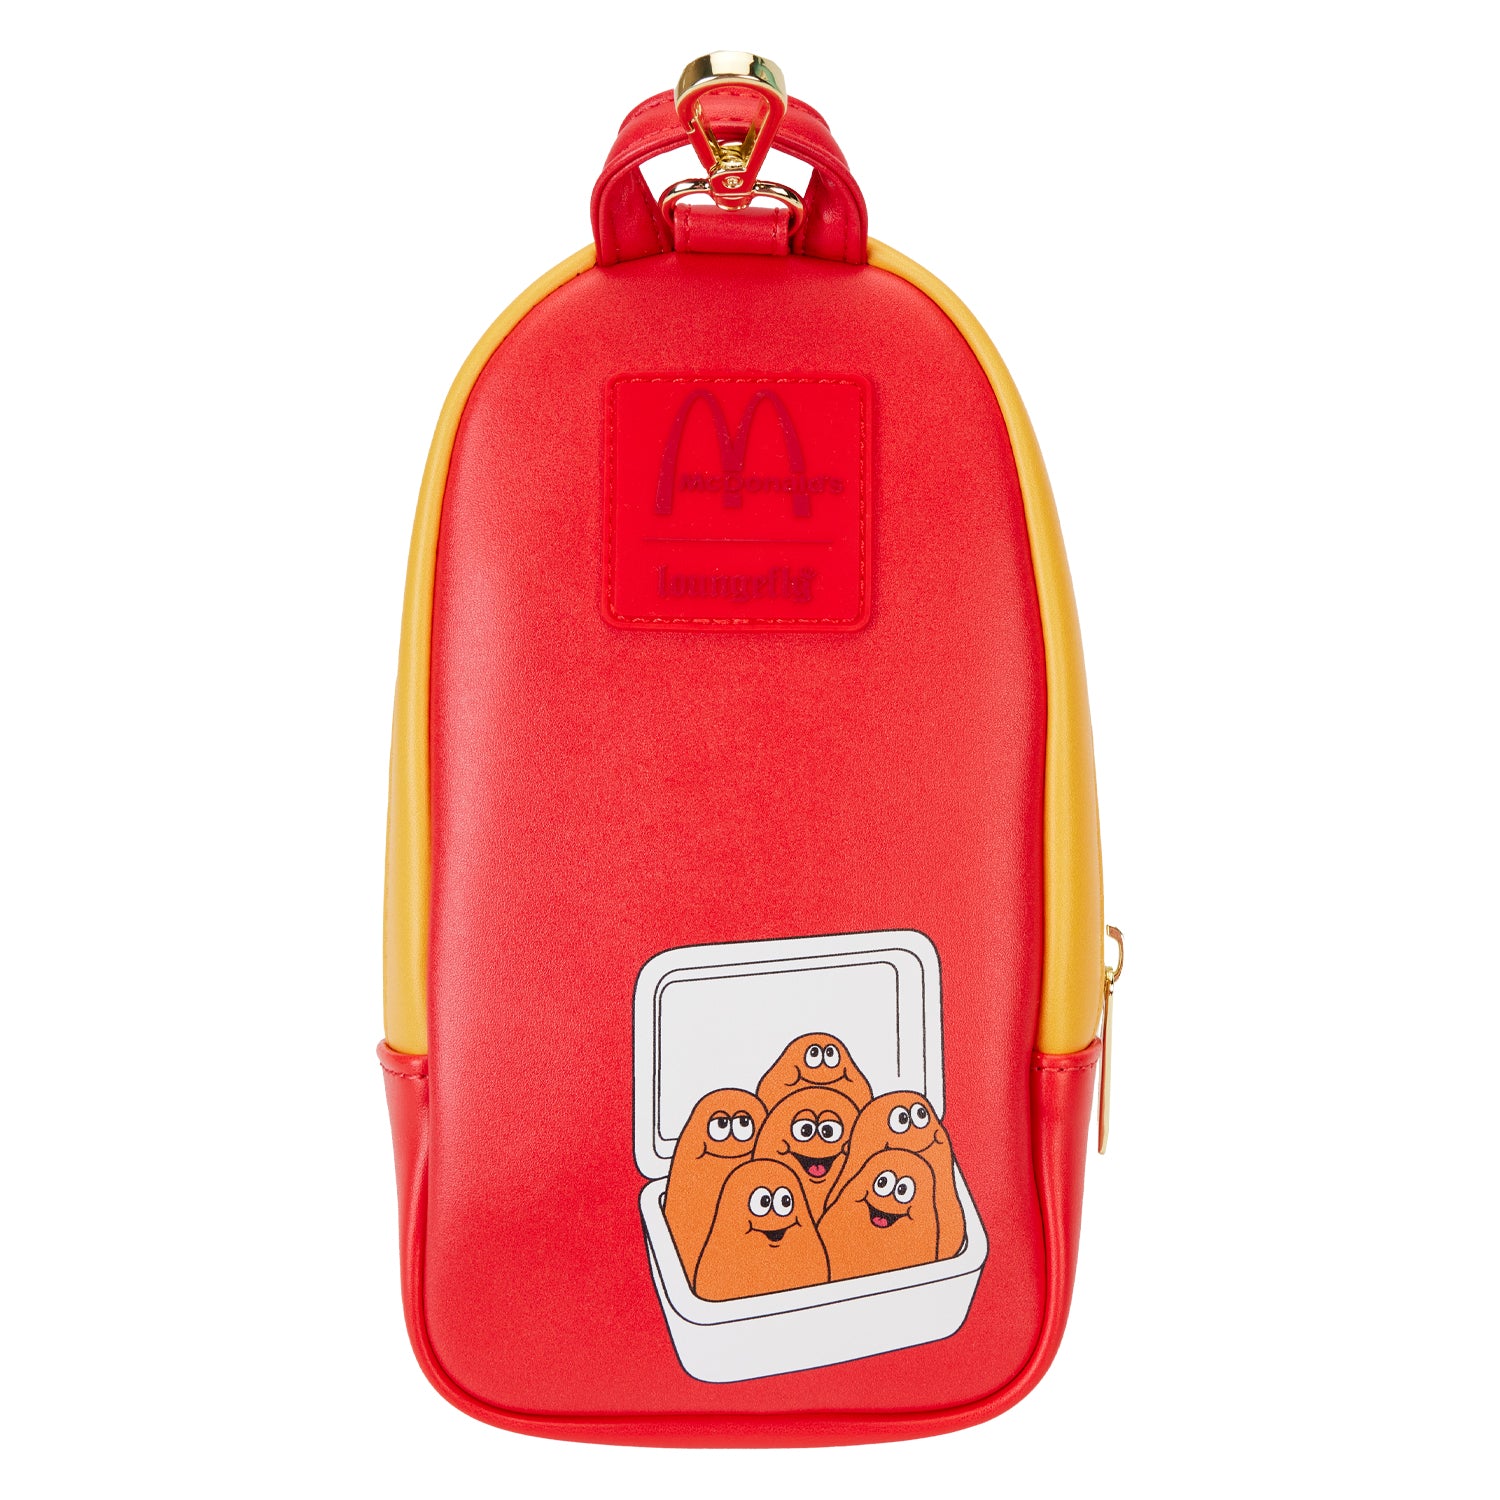 Loungefly McDonald's Chicken Nuggies Stationery Pencil Case